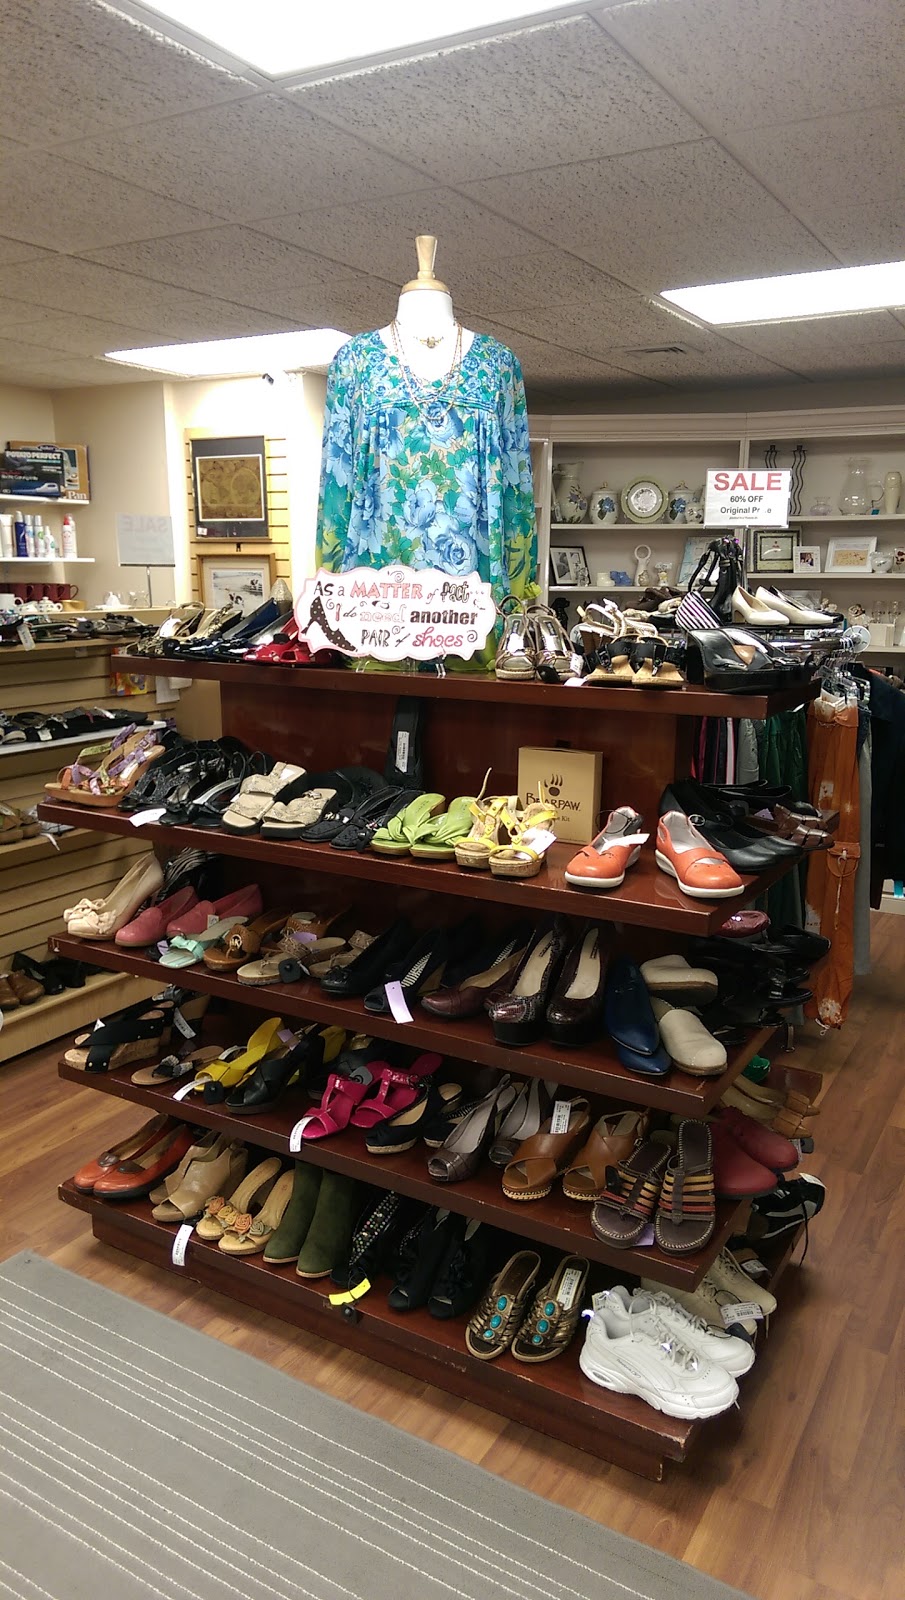 Consignment Castle | 208 College Hwy f1, Southwick, MA 01077 | Phone: (413) 998-3050